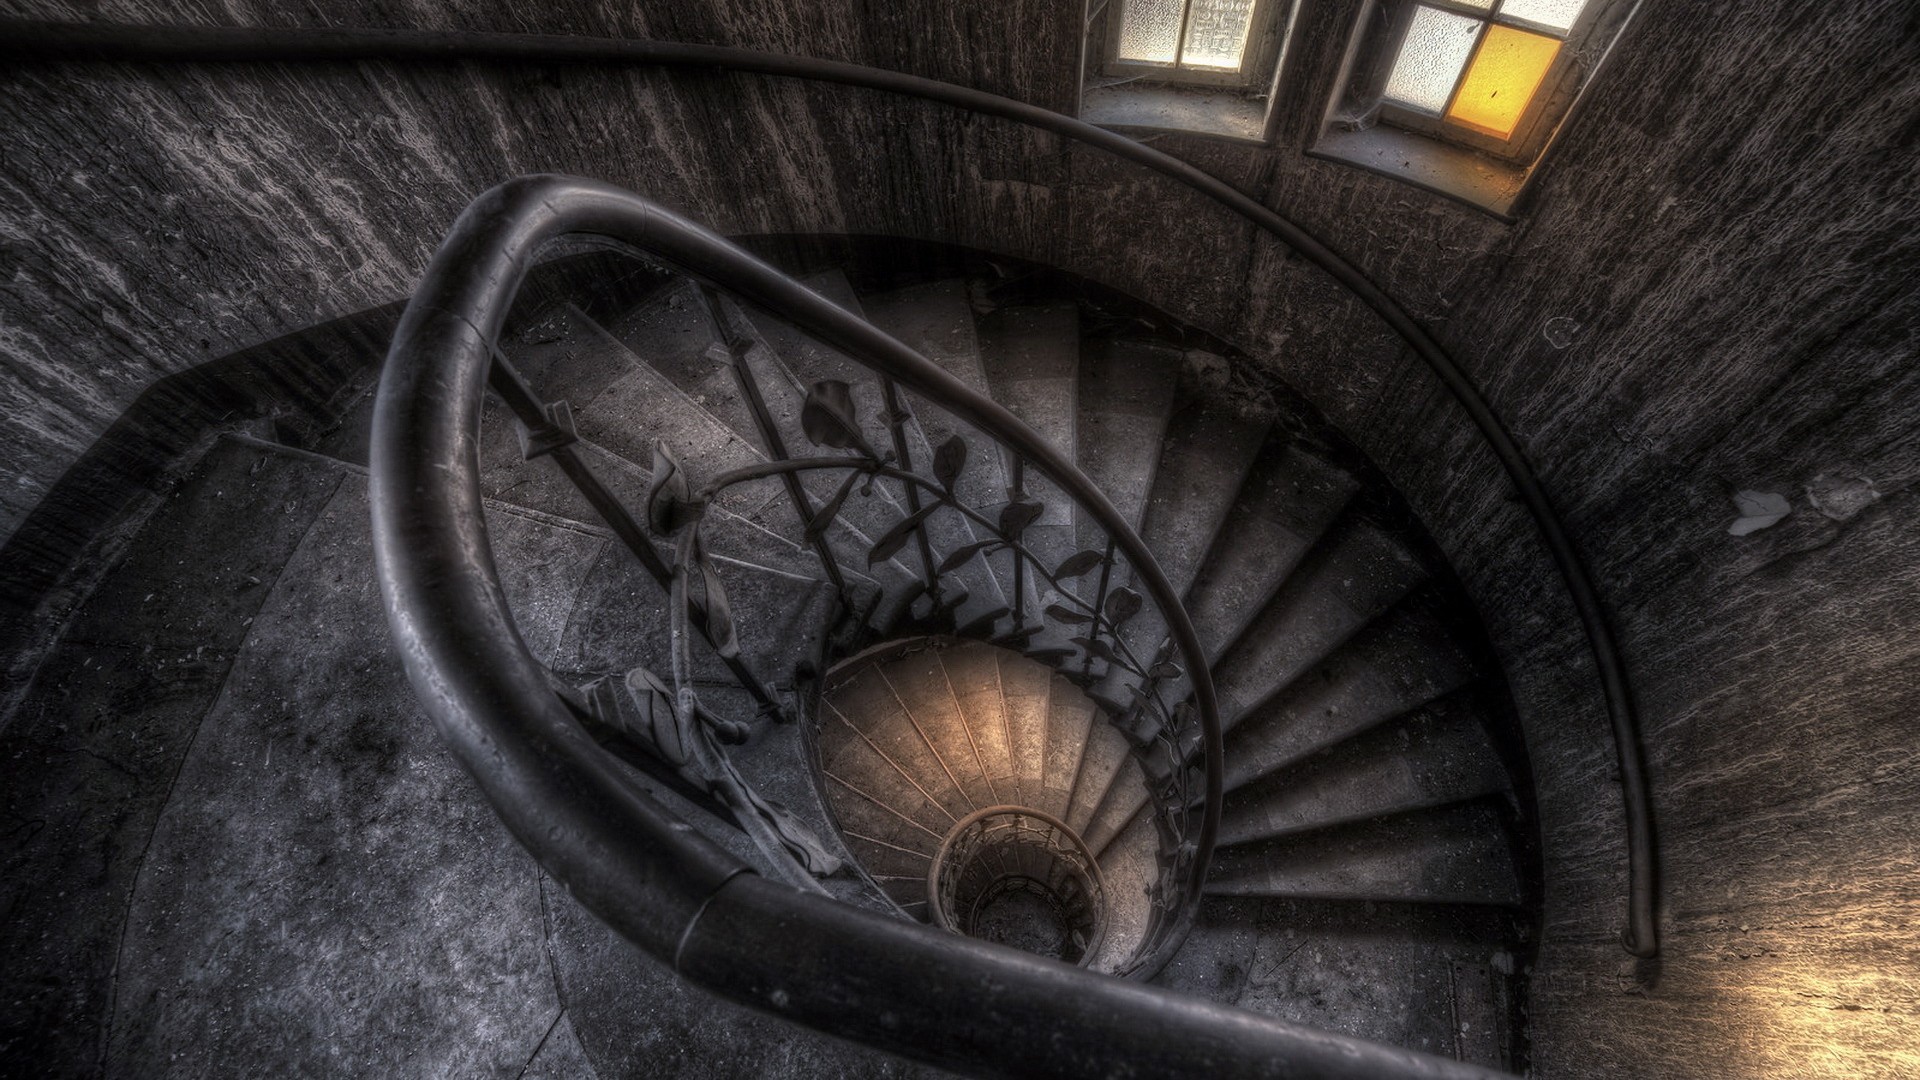 General 1920x1080 stairs indoors old house